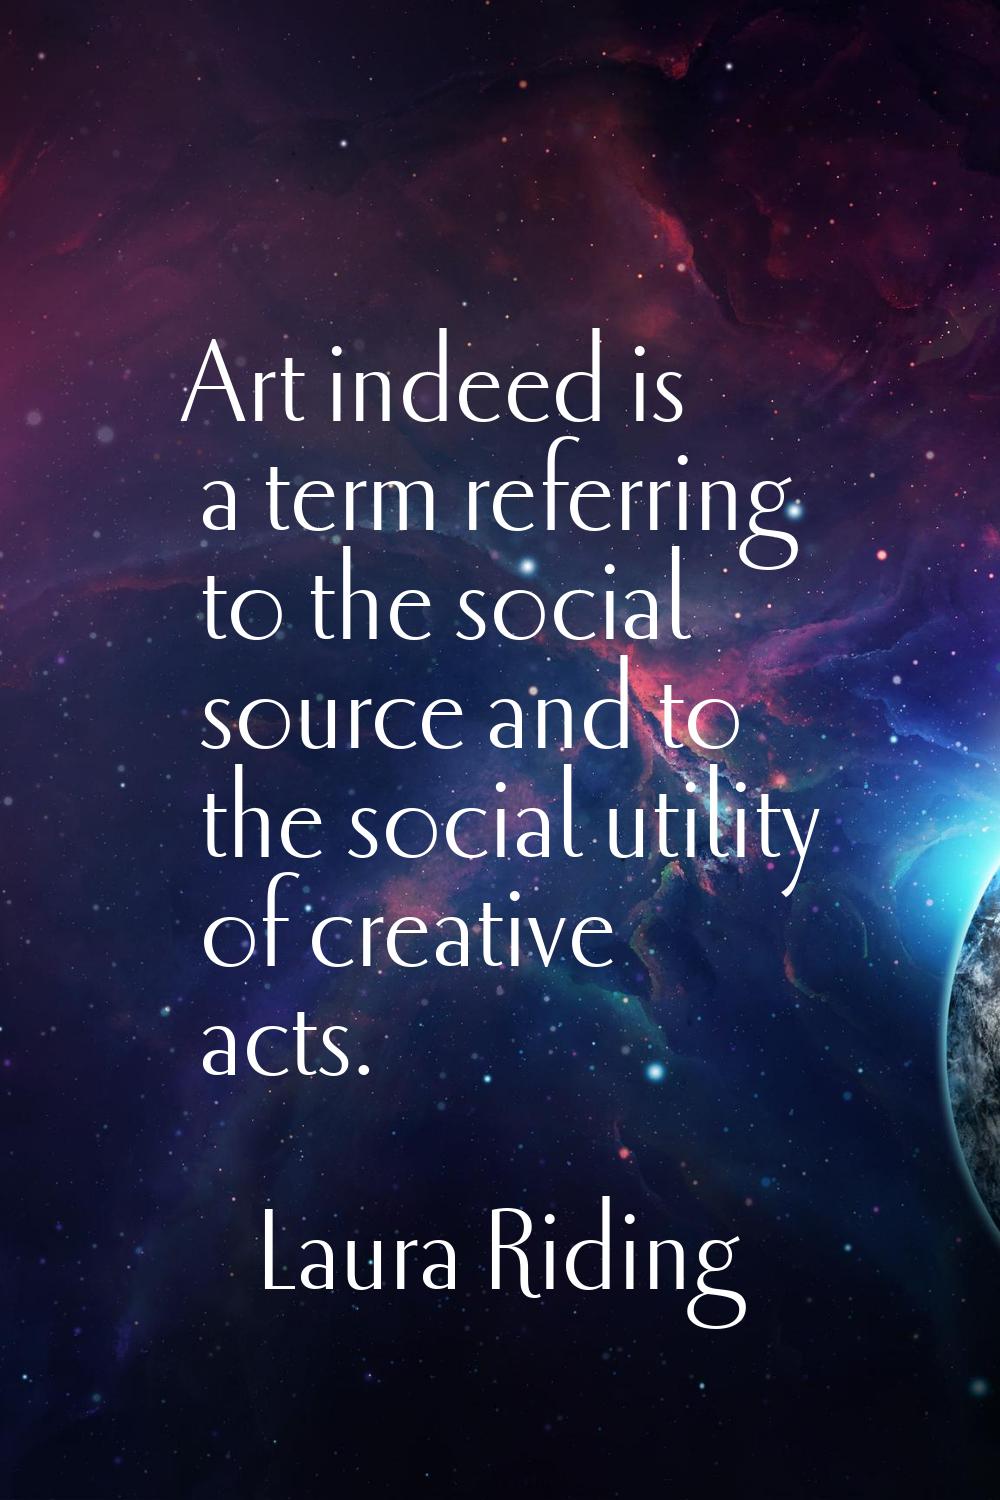 Art indeed is a term referring to the social source and to the social utility of creative acts.